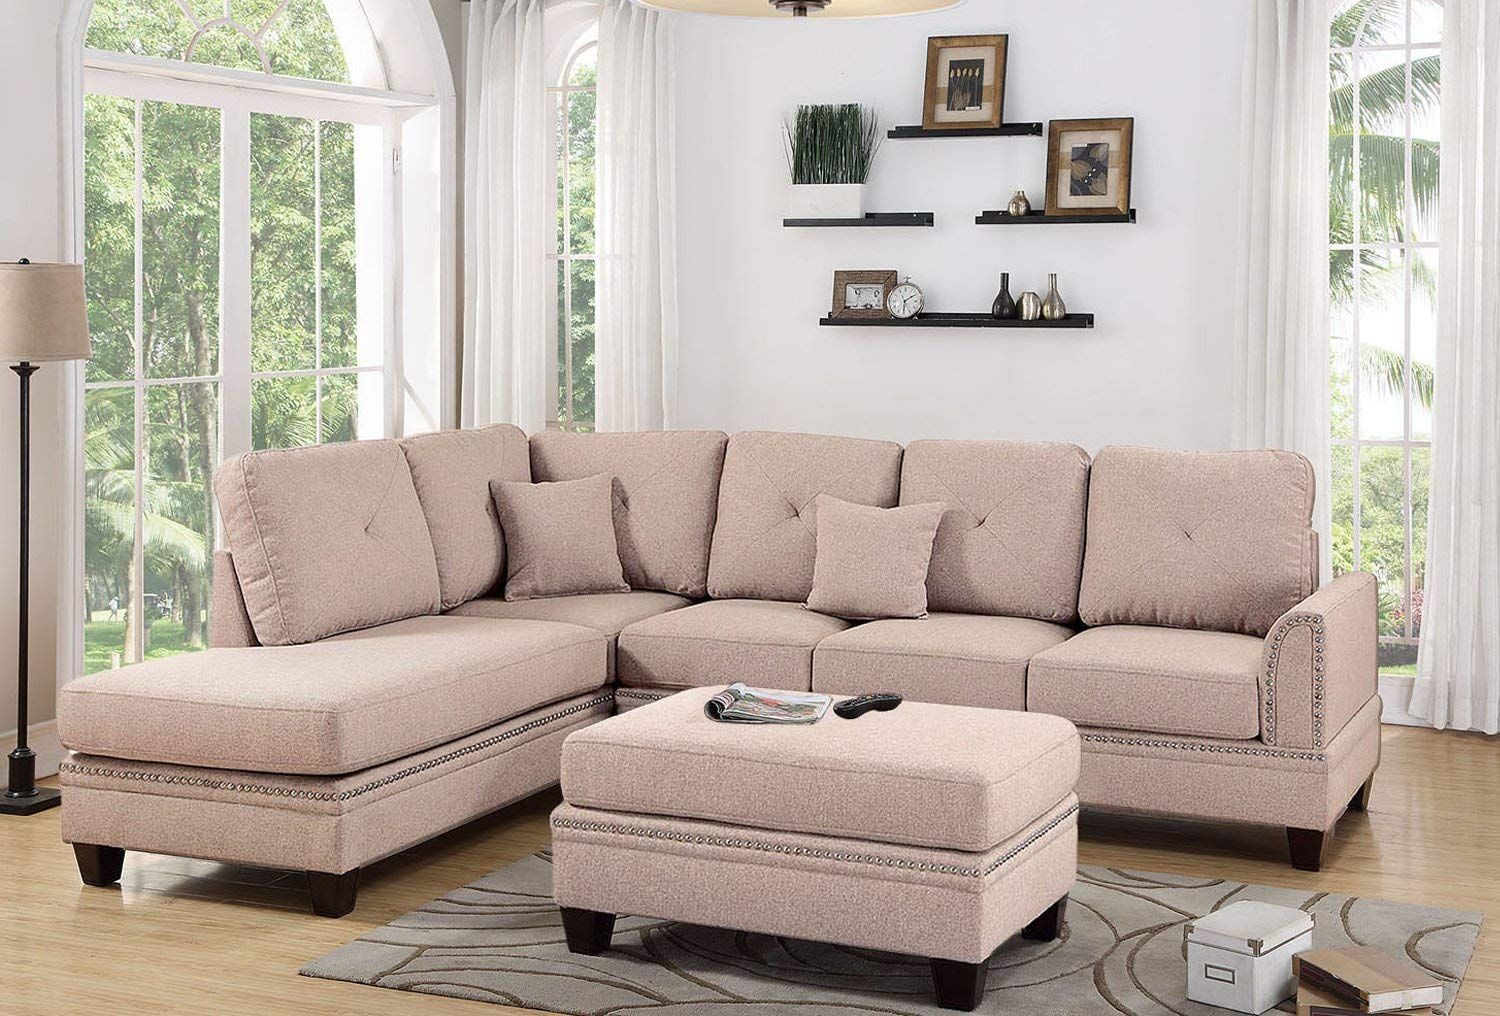 Coffee 2pc Sectional Sofa With Nail Head Trim Accents Regarding 2pc Polyfiber Sectional Sofas With Nailhead Trims Gray (View 15 of 15)